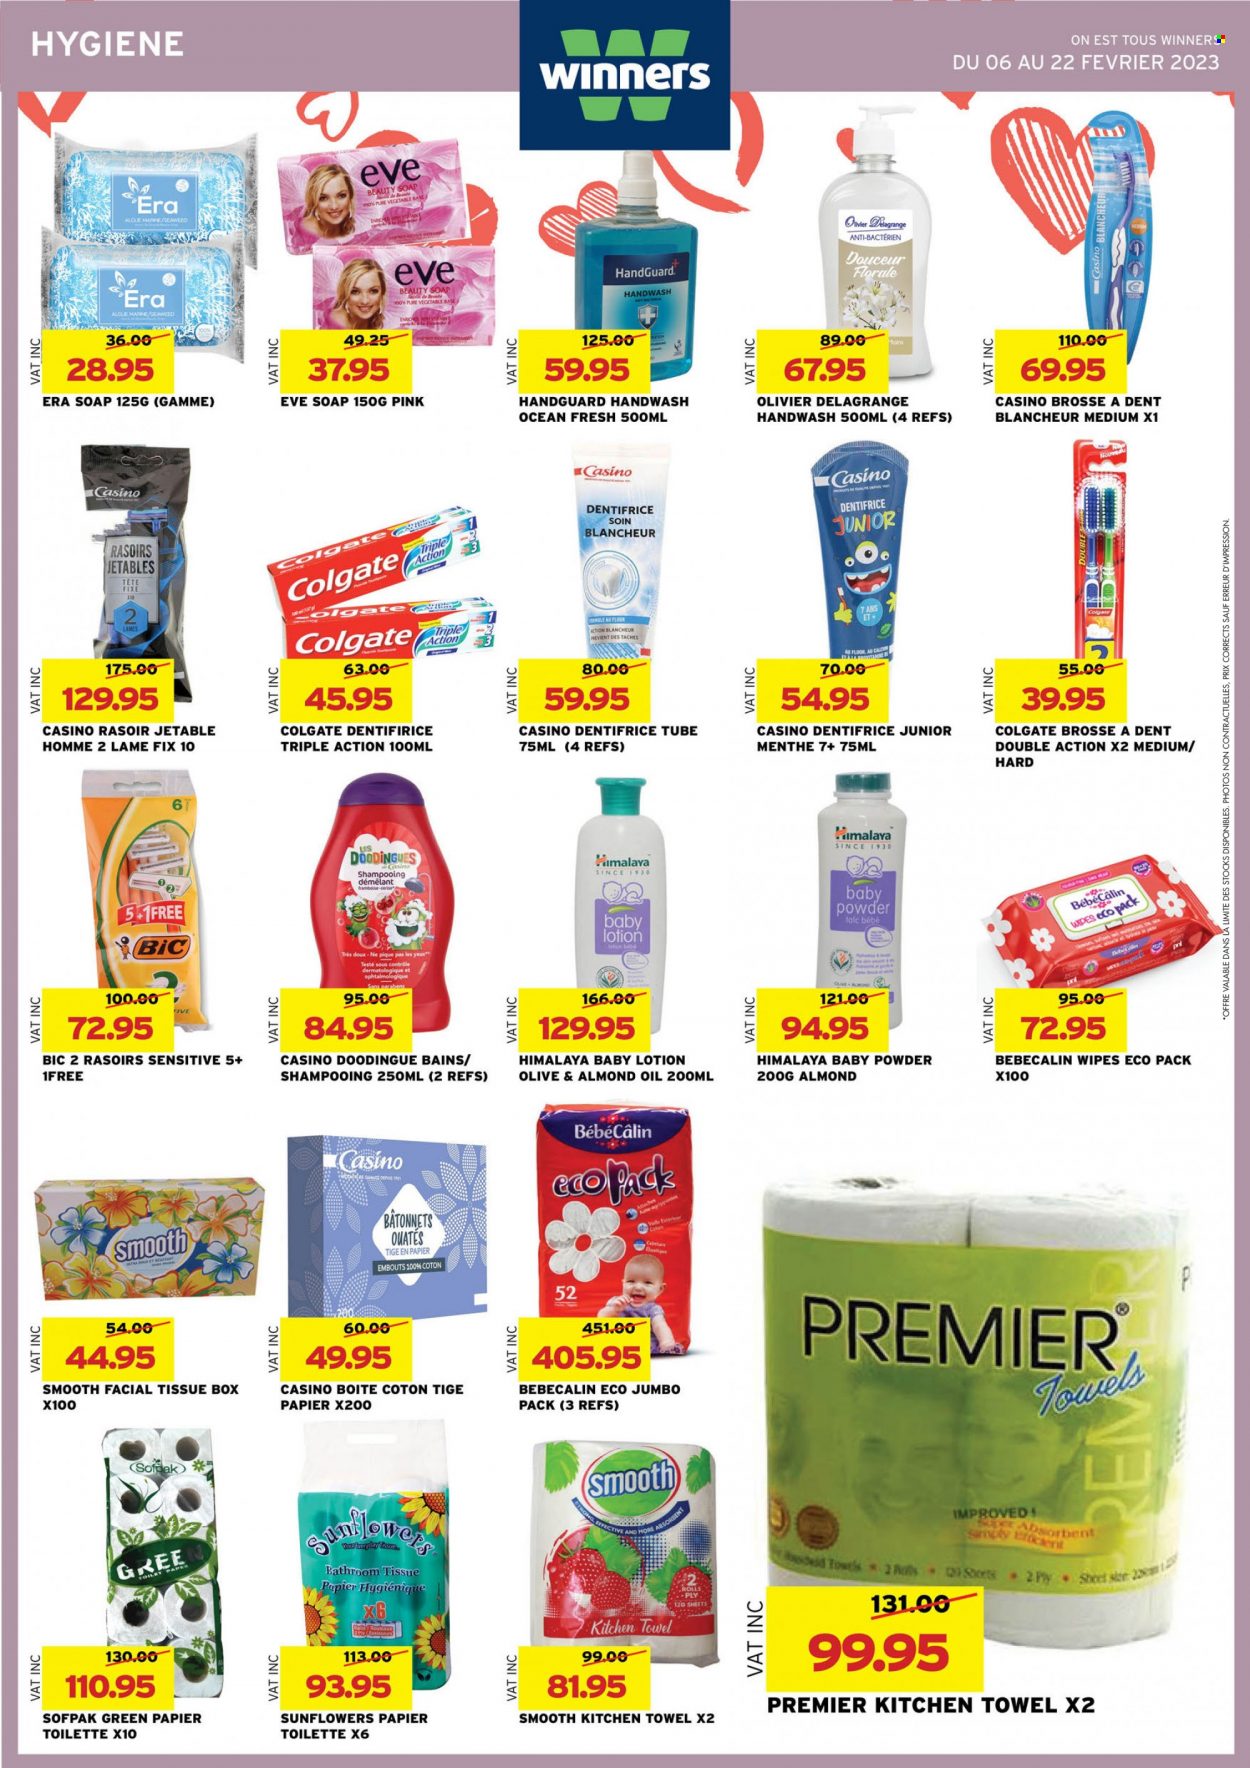 thumbnail - Winner's Catalogue - 6.02.2023 - 22.02.2023 - Sales products - seaweed, wipes, baby powder, bath tissue, toilet paper, kitchen towels, hand wash, soap, body lotion, BIC, Colgate. Page 21.